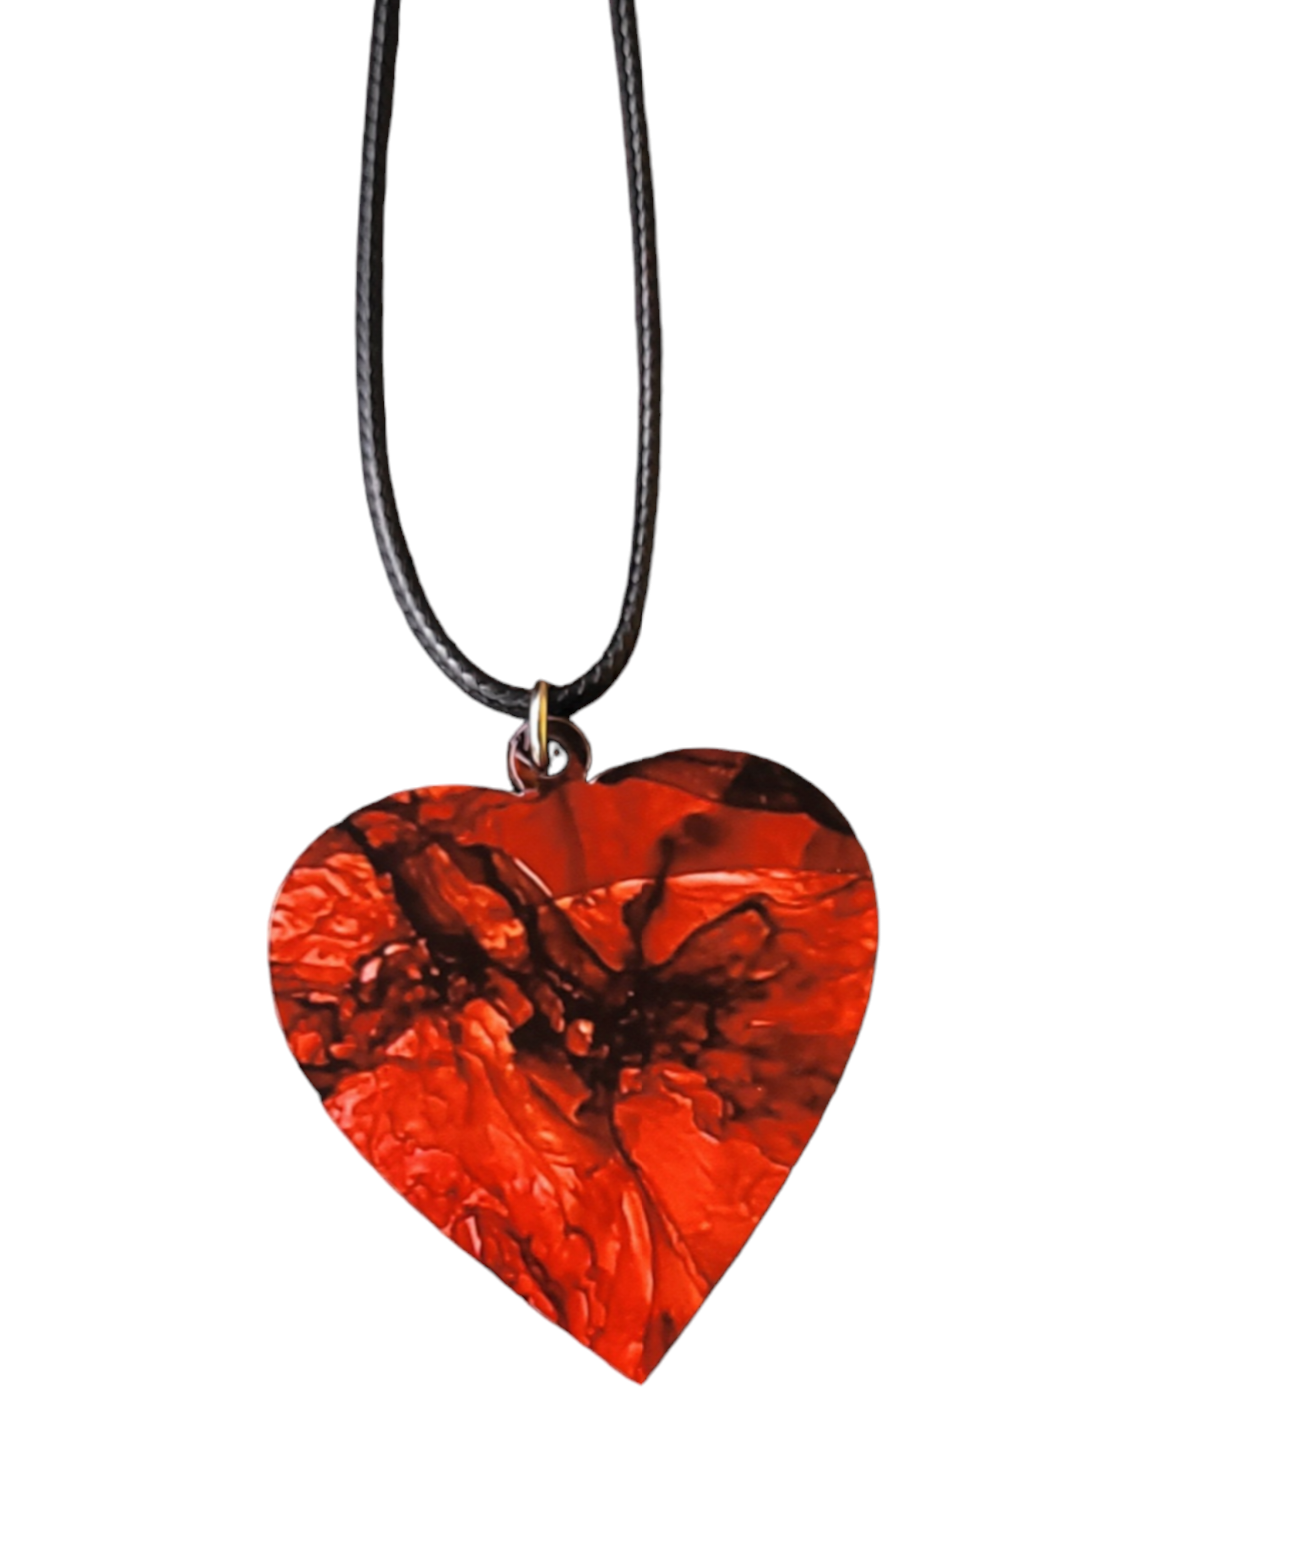 Heart-Shaped Necklaces